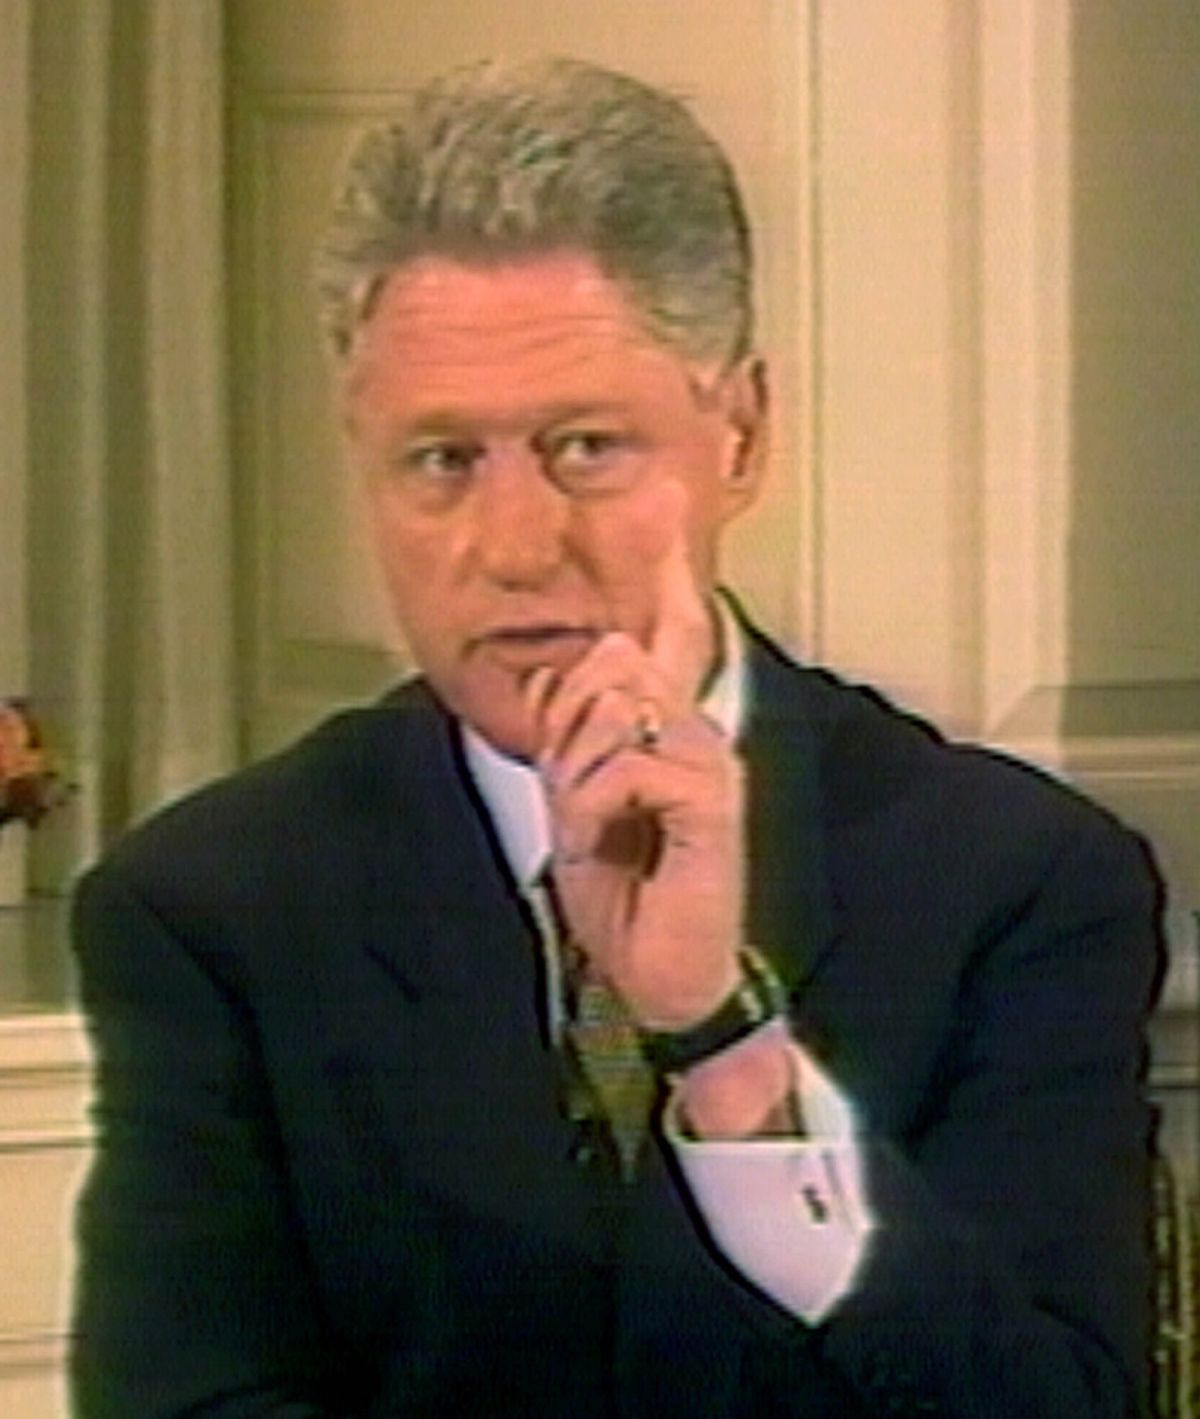 On his last day in office, President Bill Clinton Friday avoided a possible criminal indictment in the Monica Lewinsky scandal by agreeing to admit that he gave misleading testimony, the White House said January 19, 2001. In a statement, Clinton admitted that he "knowingly violated" the law in giving testimony about his affair with the former White House intern in sworn testimony in the Paula Jones sexual harassment case three years ago. Clinton is shown in an August 17, 1998 videotape testifying to a grand jury in this file photo released to the general public September 21, 1998.

SV (Â© Reuters Photographer / Reuters)